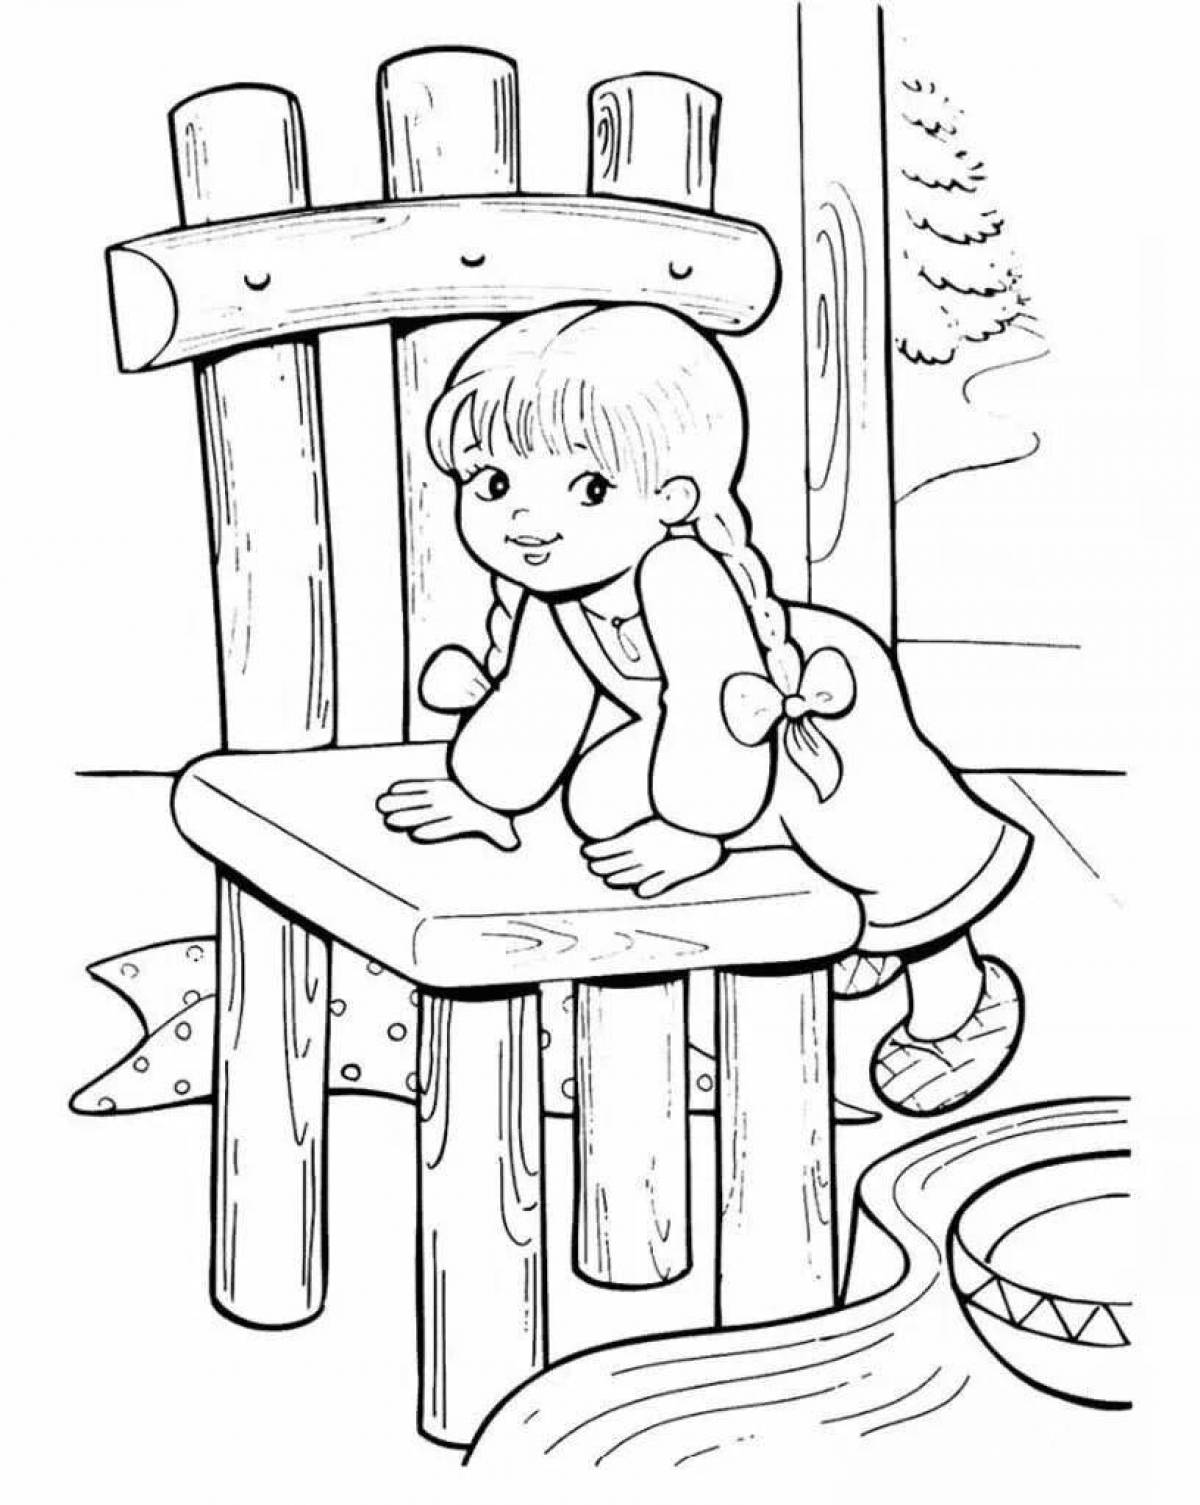 Perfect 3 bears coloring page for babies